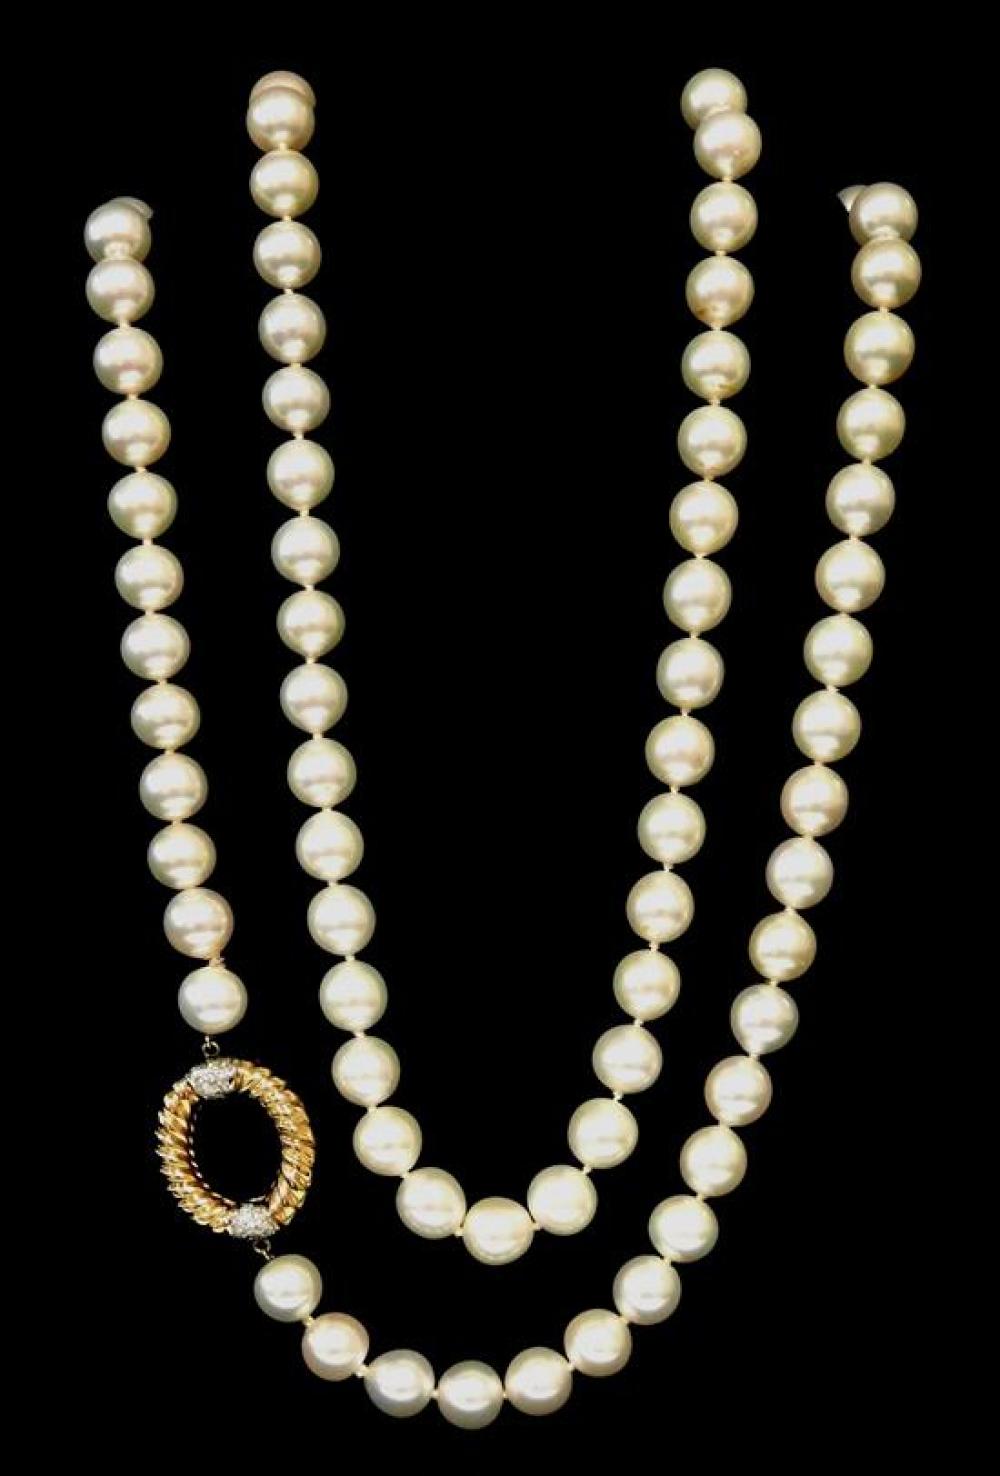 JEWELRY CULTURED PEARL NECKLACE 31d3fc